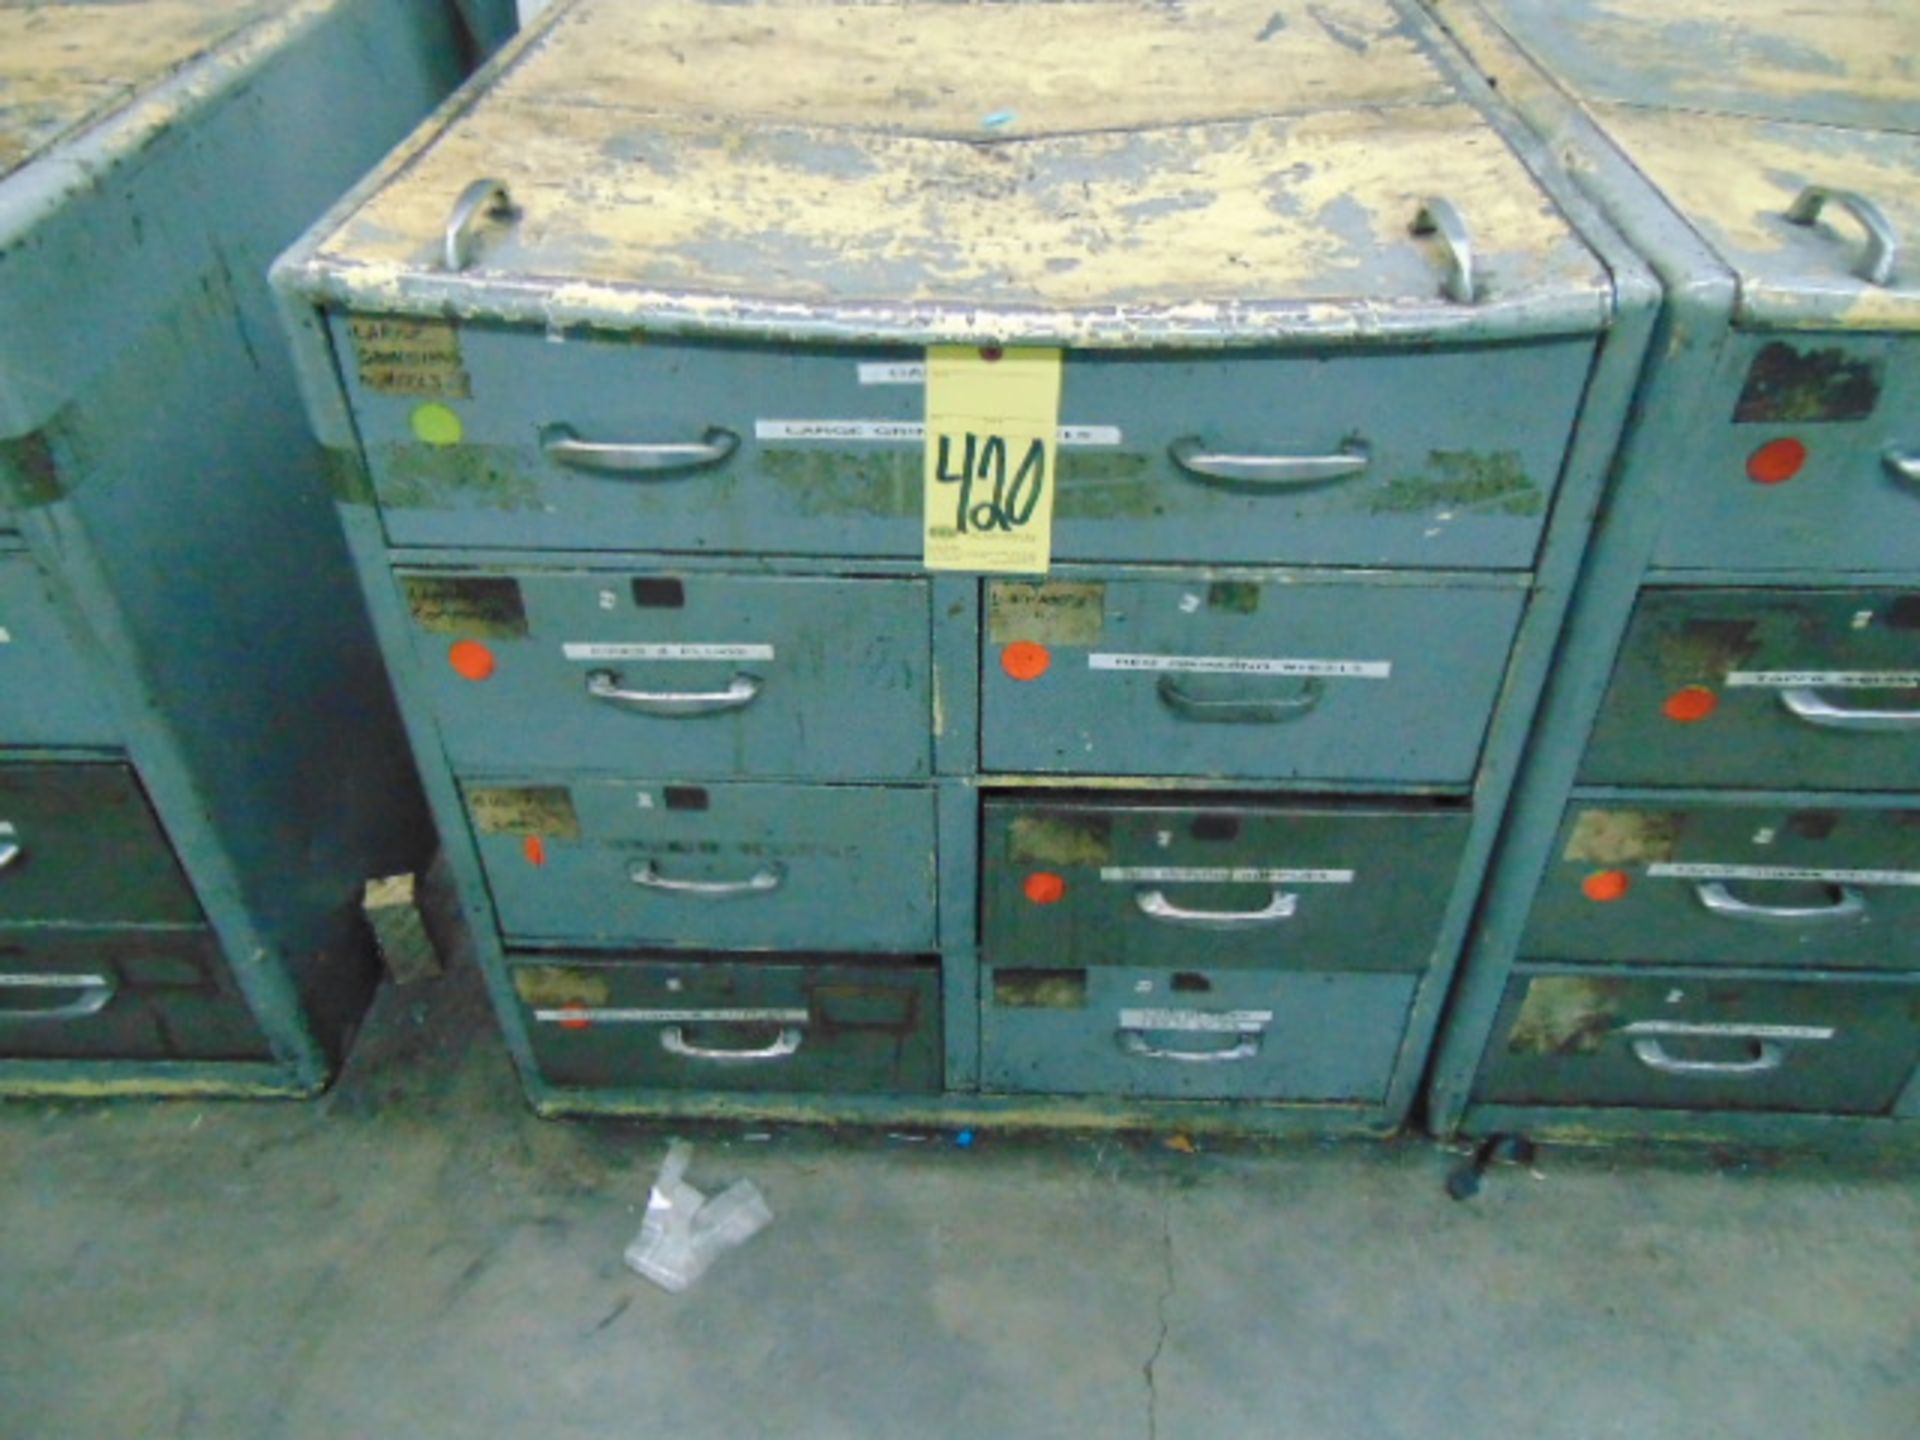 LOT CONSISTING OF: grinding wheels, hoses, electrical connections & misc., w/cabinet, assorted